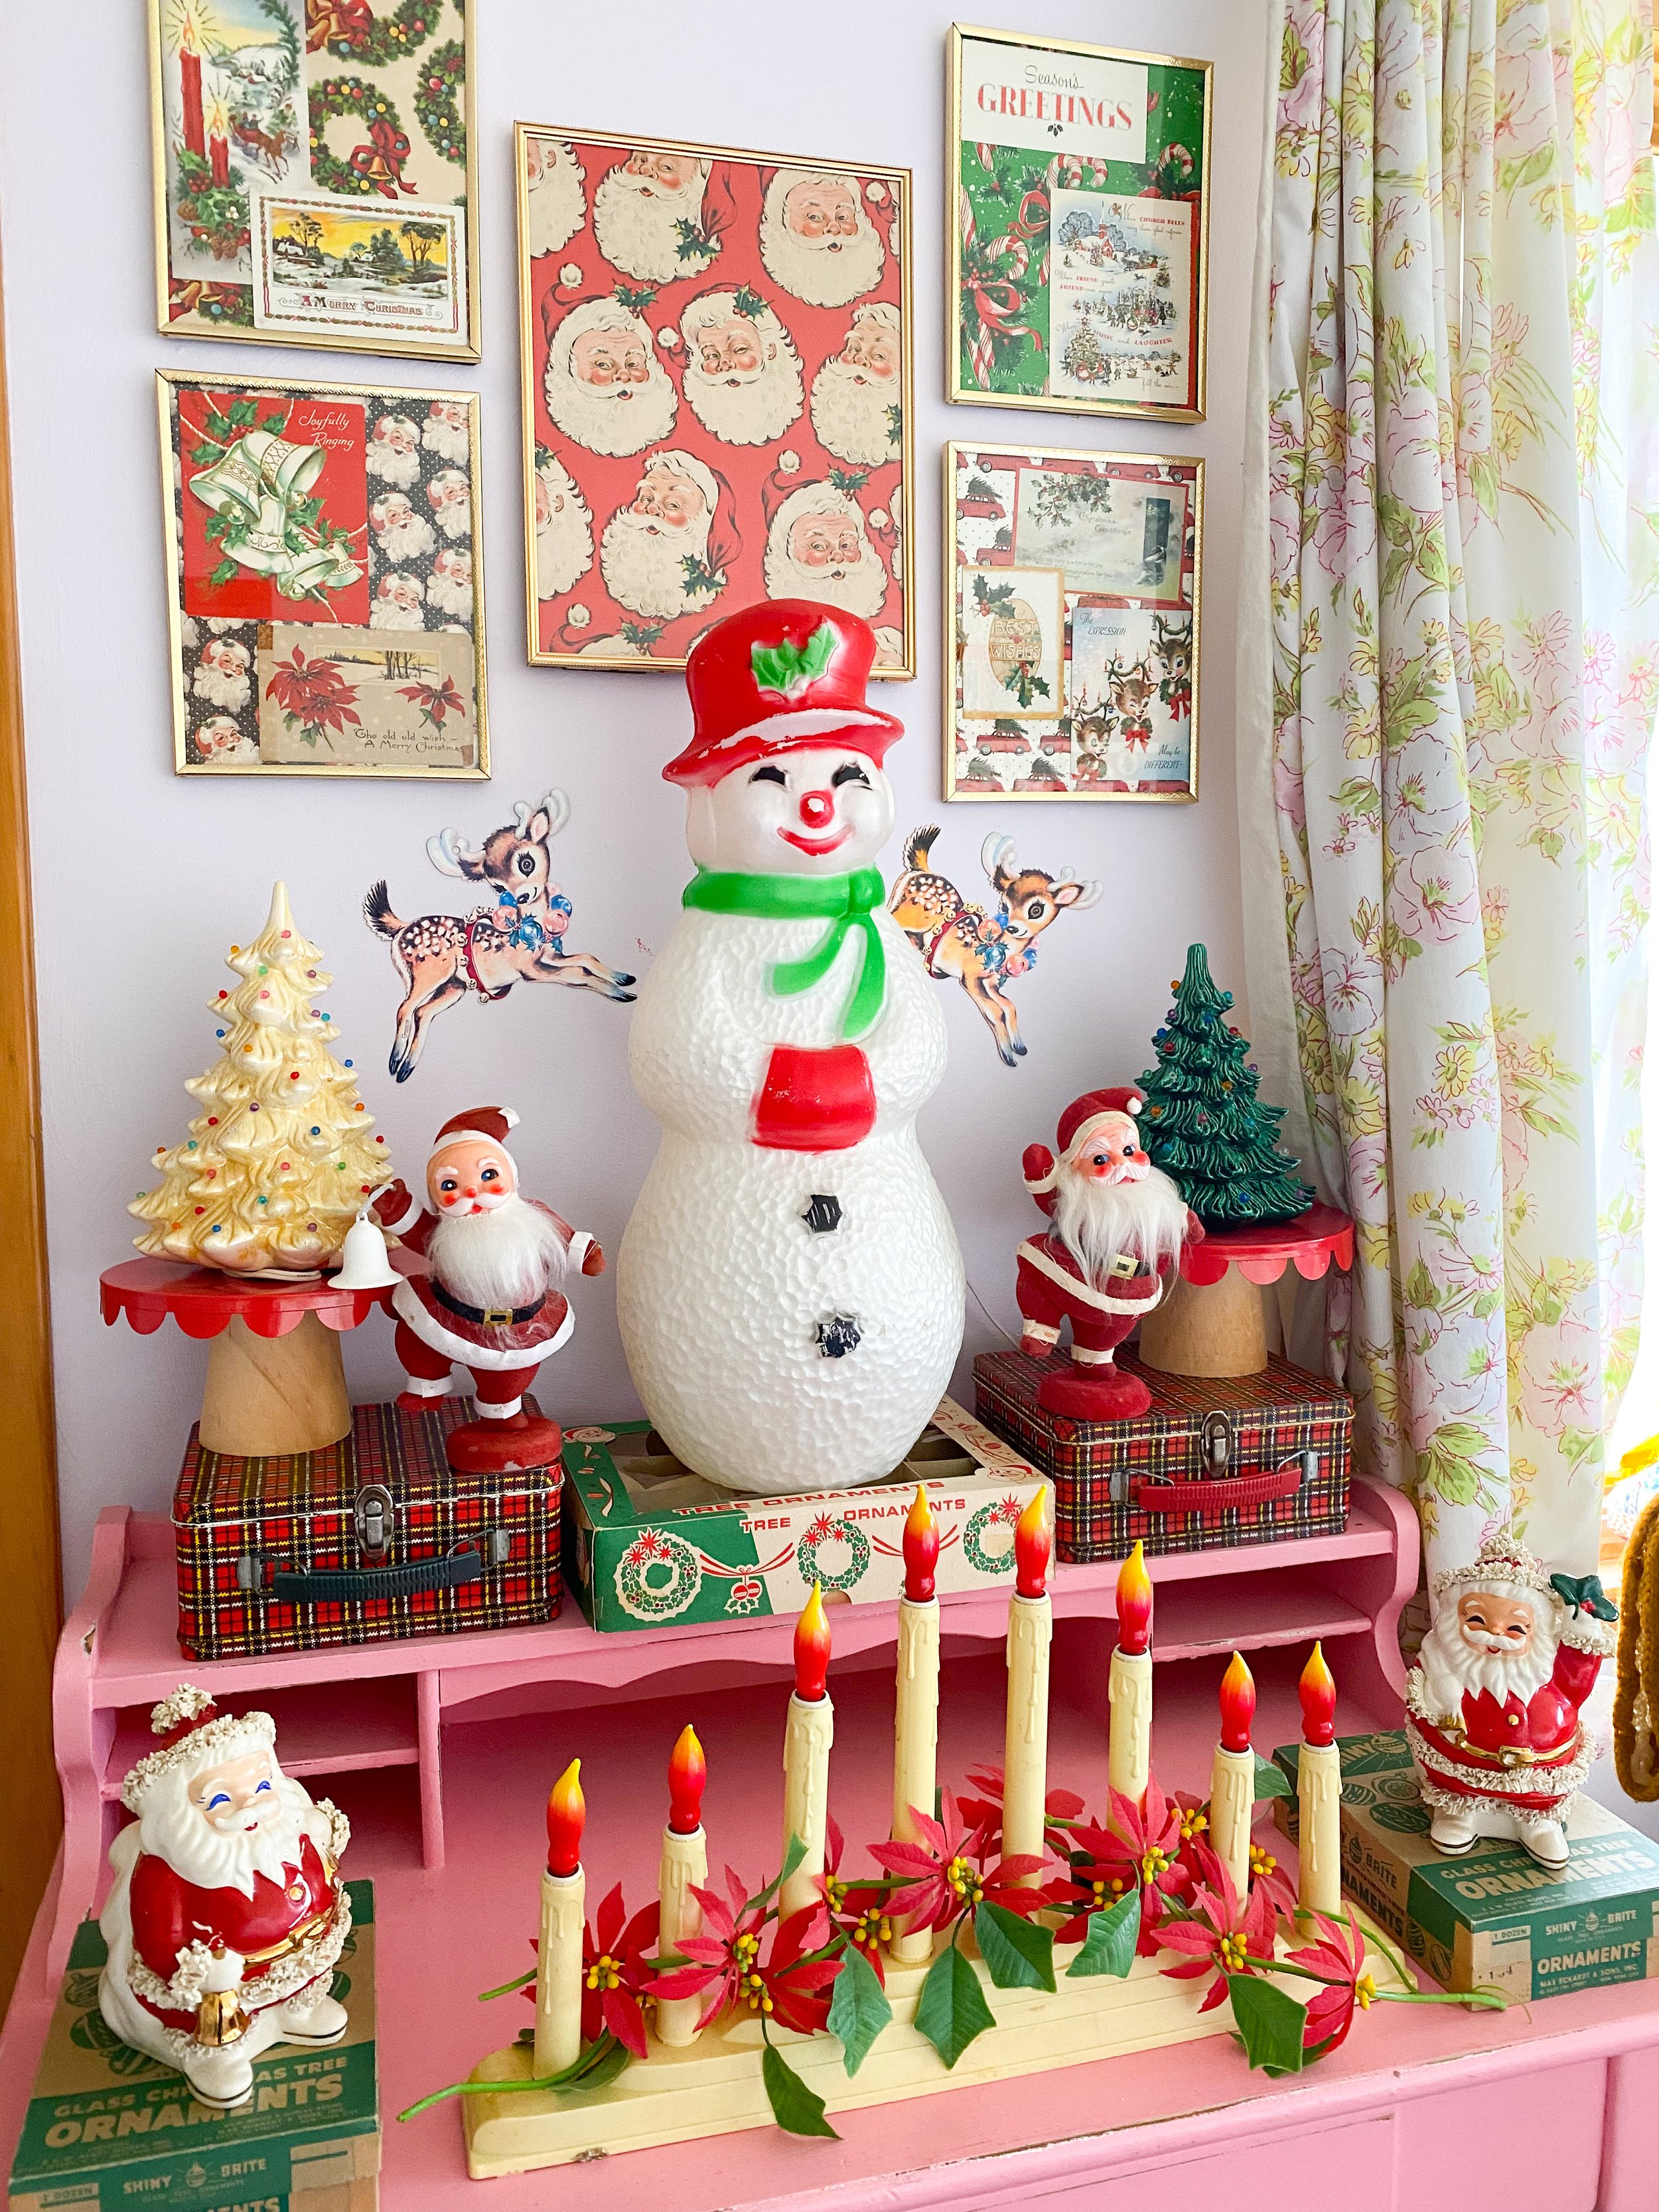 Buy Vintage Christmas Decorations for the Best Holiday Decor